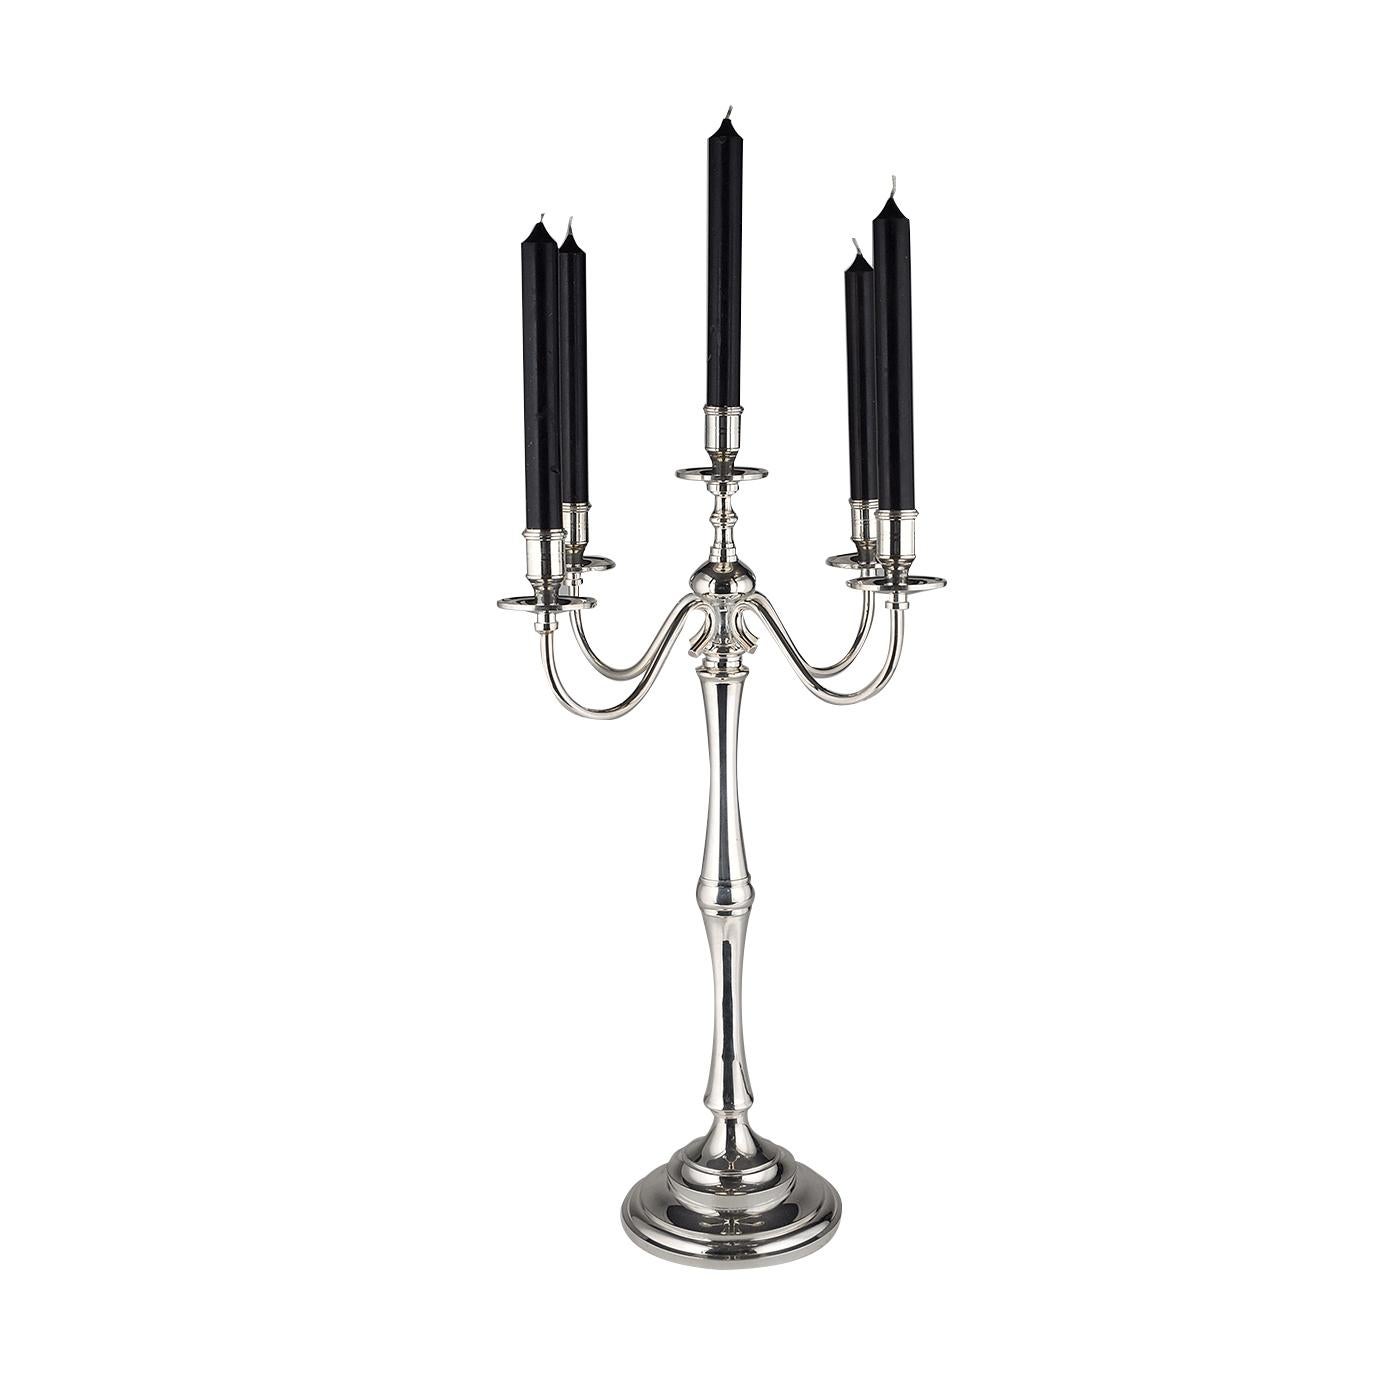 Italian Imperial Seven-Candle Candleholder